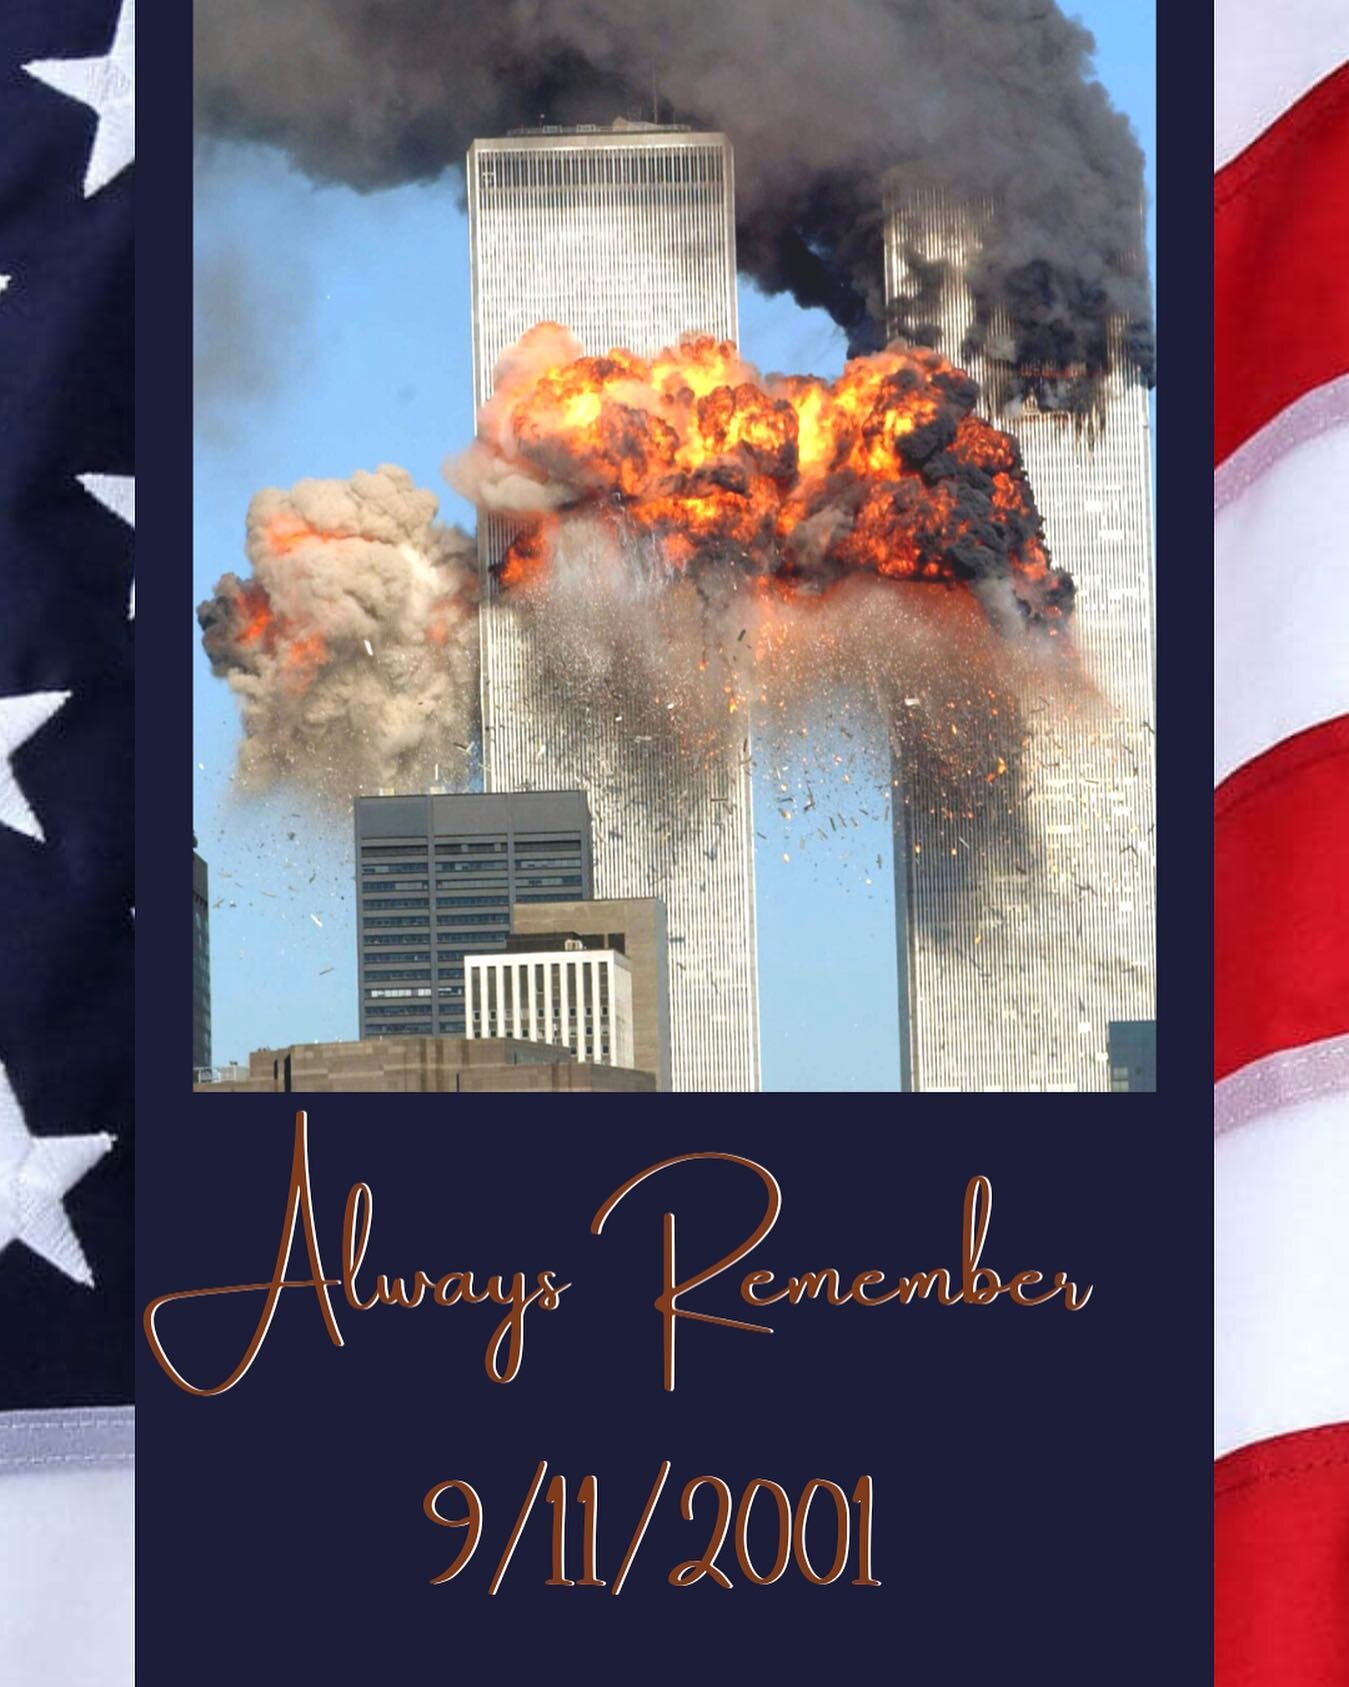 21 years ago and I still remember exactly where I was the moment I heard the news. I remember being glued to the news, I remember the fear, the sorrow, the uncertainty. Evil invaded our lives that day but America united and stood strong together. Her